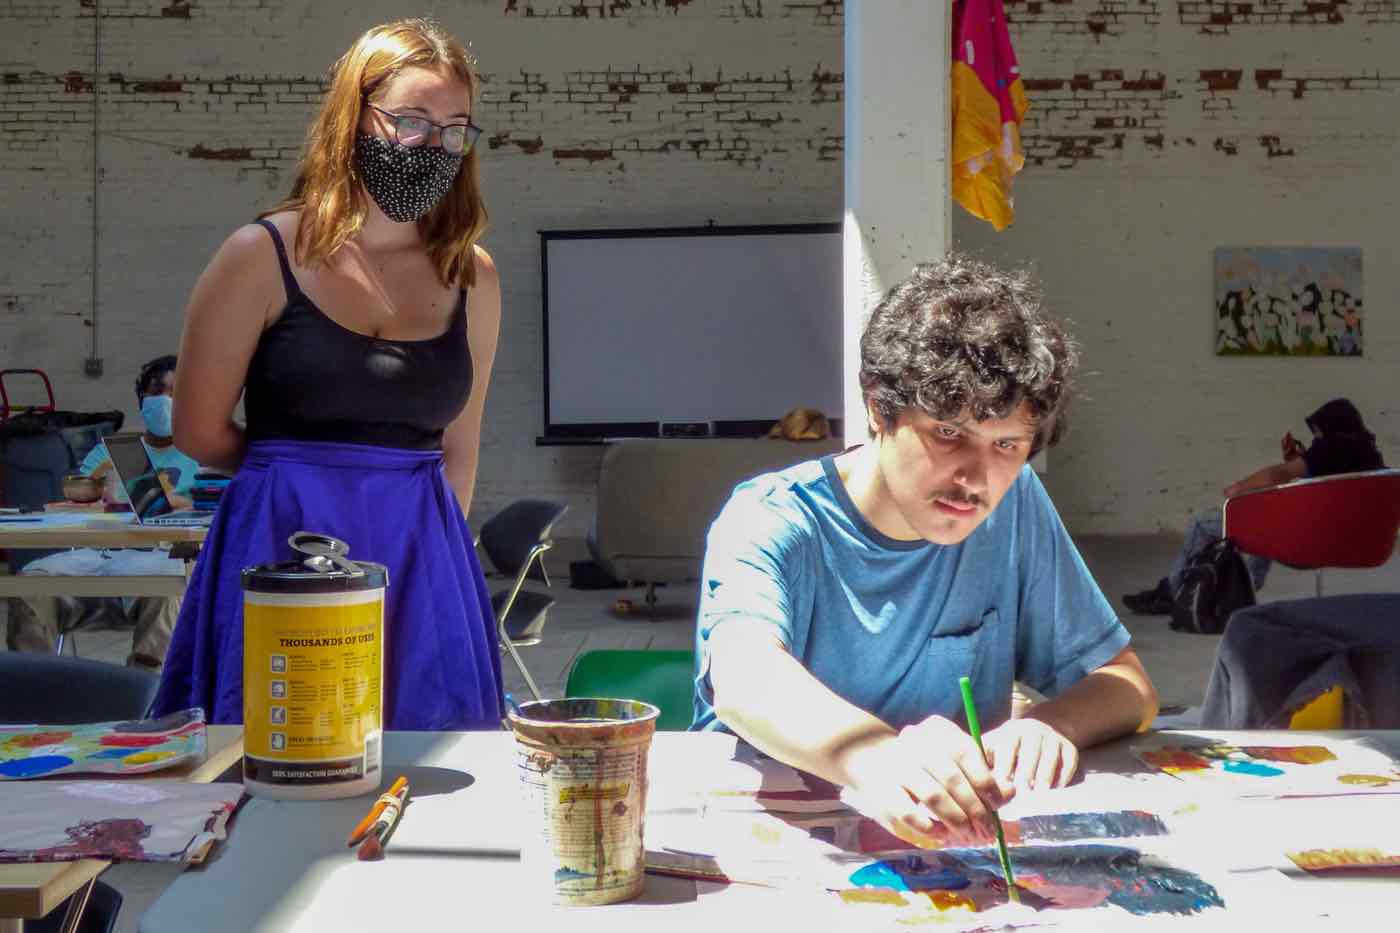 A female student looks at a male student painting a picture at a table.